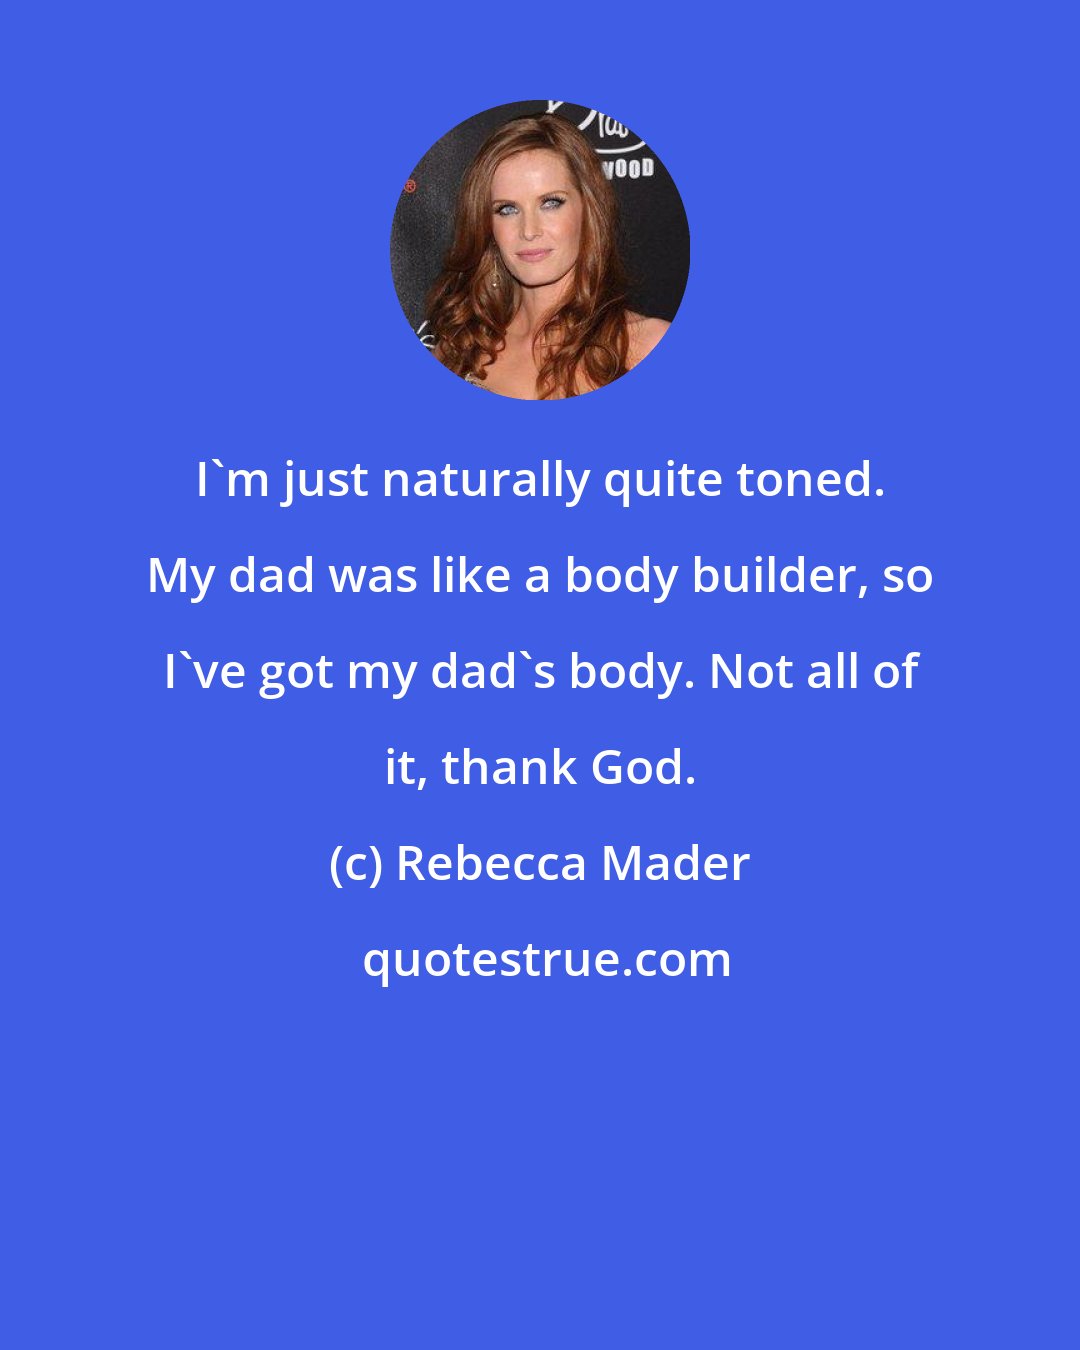 Rebecca Mader: I'm just naturally quite toned. My dad was like a body builder, so I've got my dad's body. Not all of it, thank God.